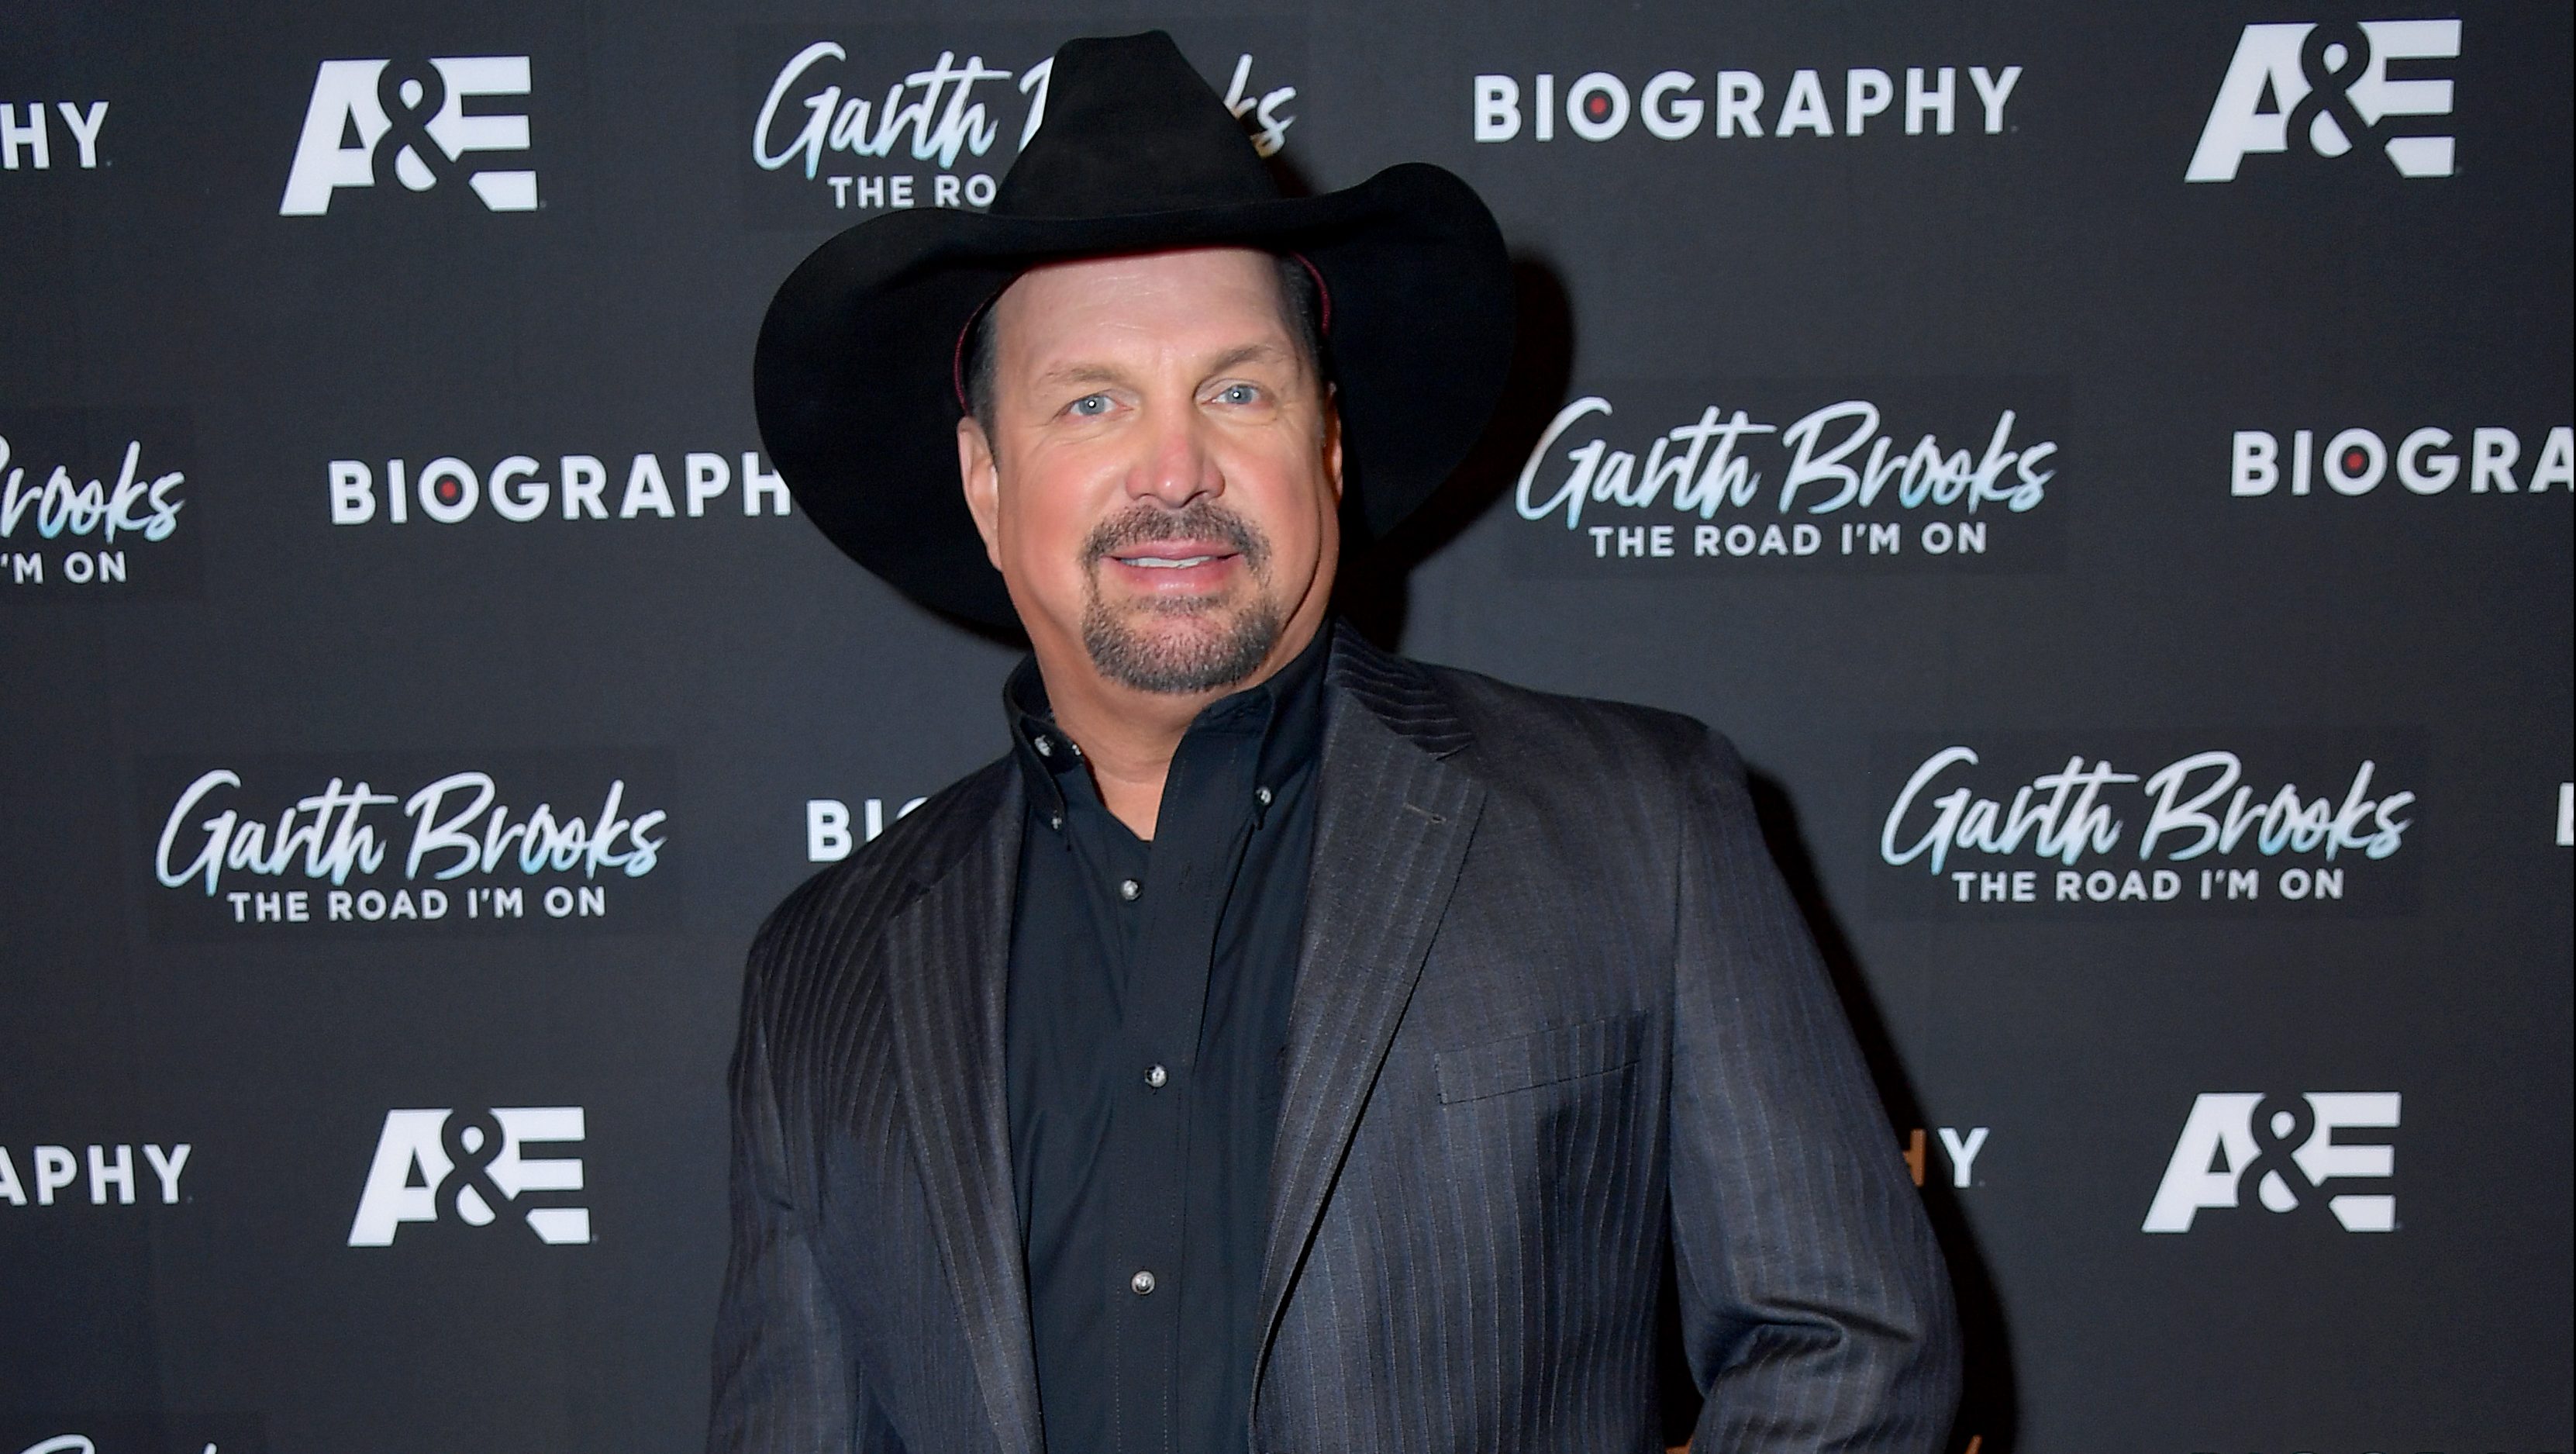 Garth Brooks’ Net Worth 5 Fast Facts You Need to Know